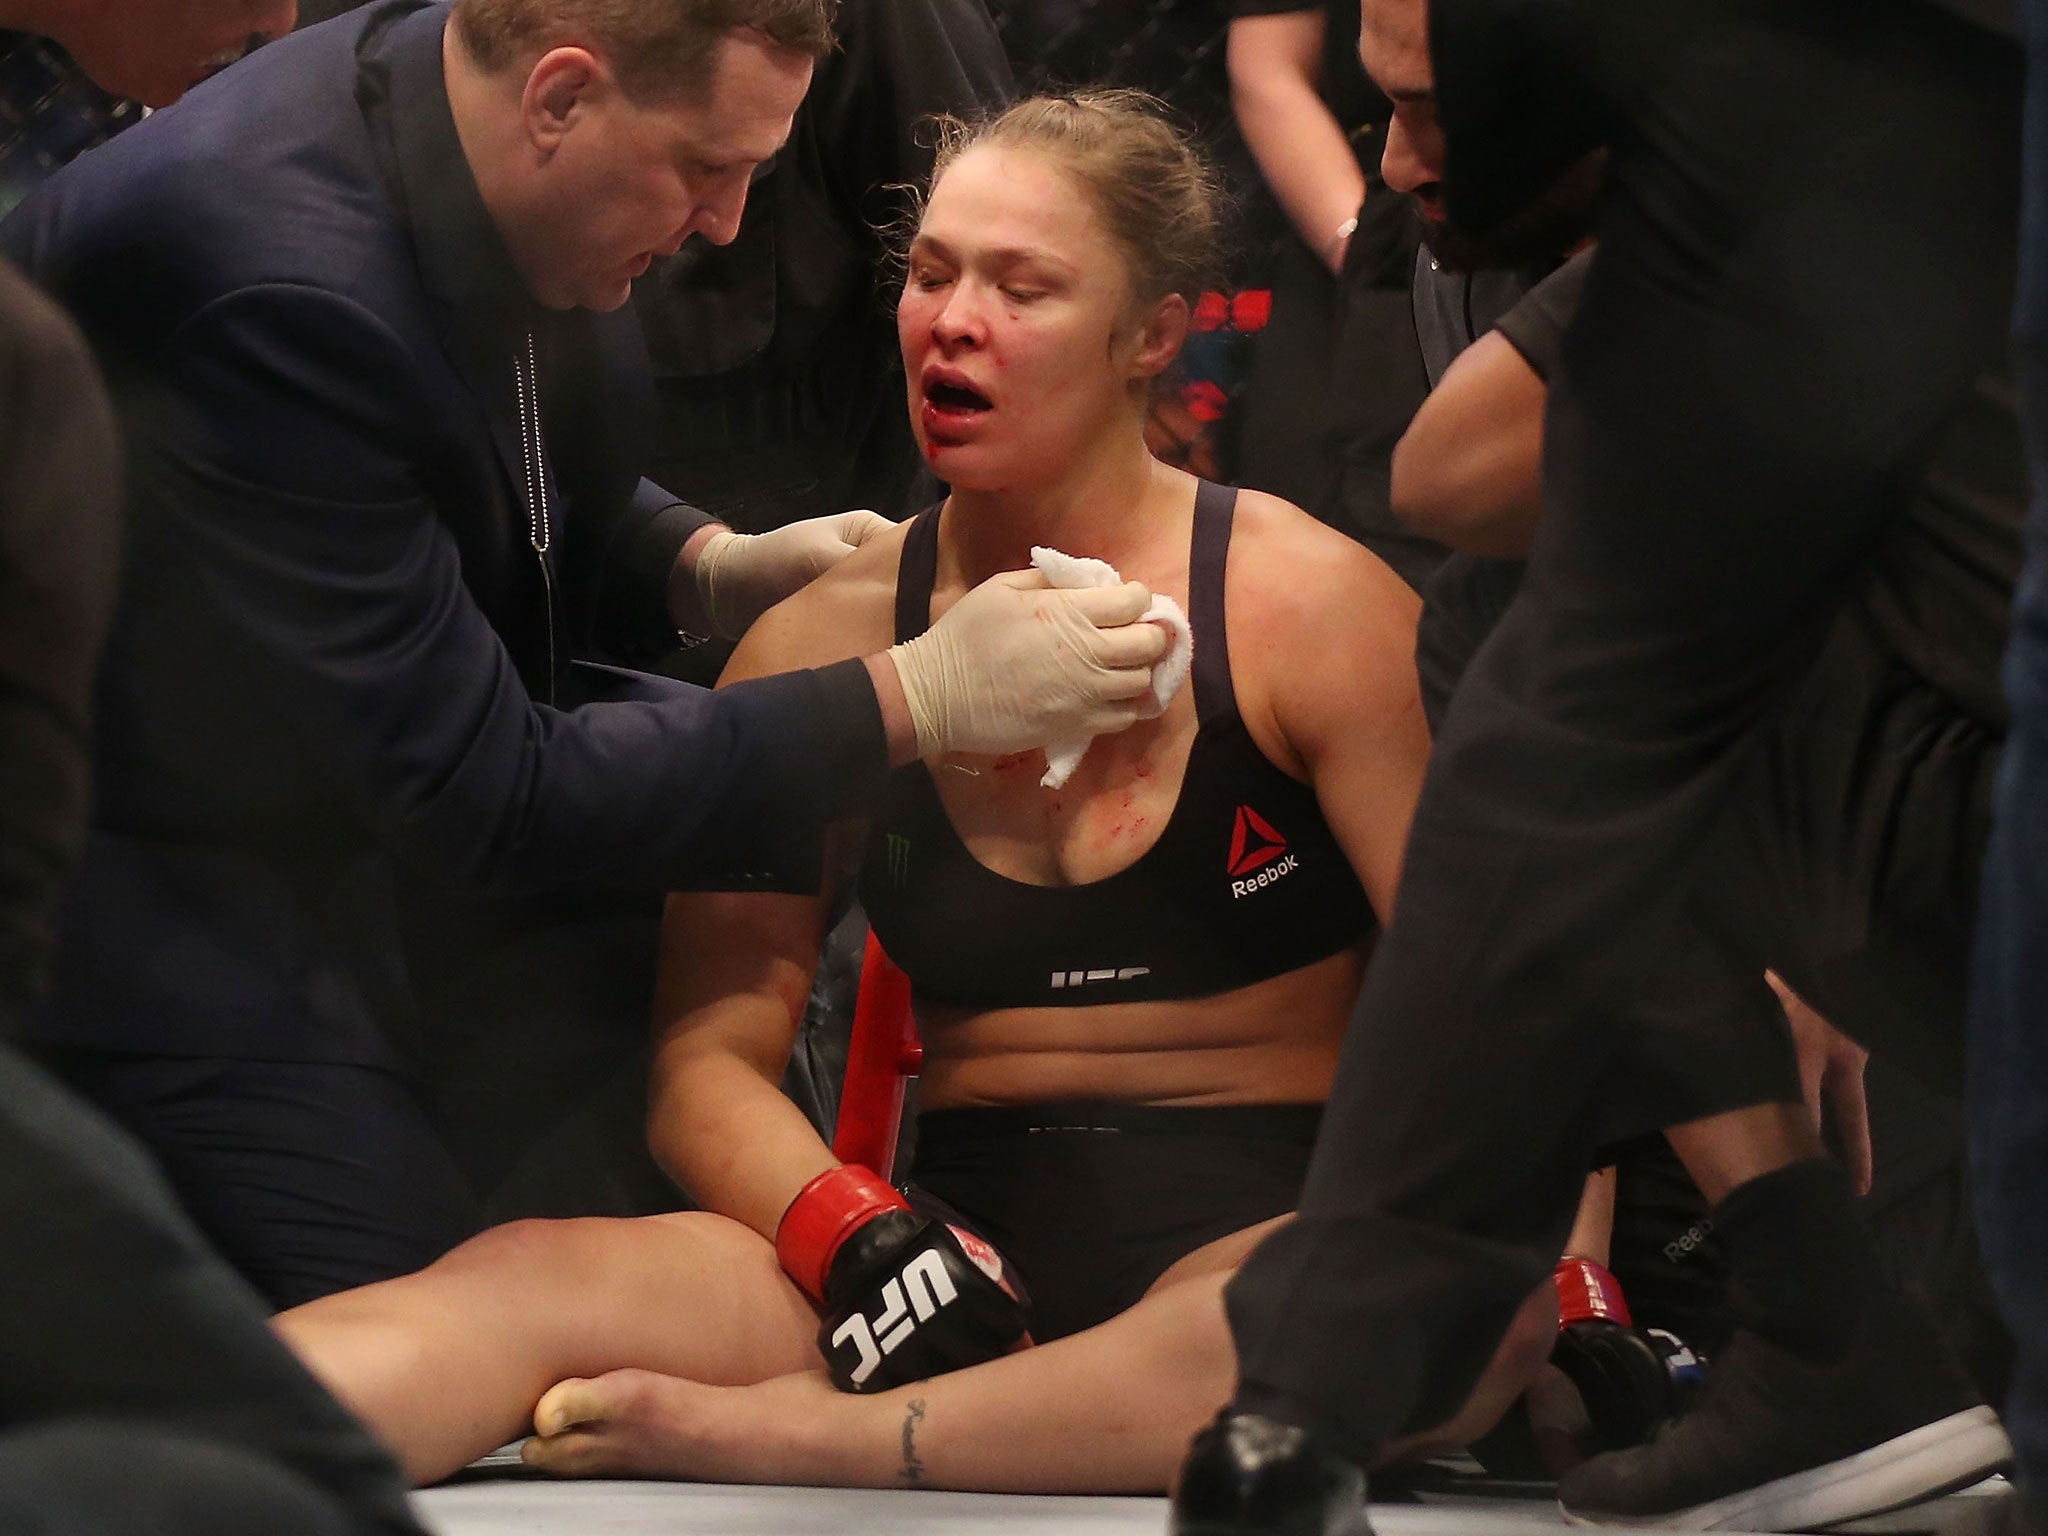 Ronda Rousey is treated after being knocked out by Holly Holm